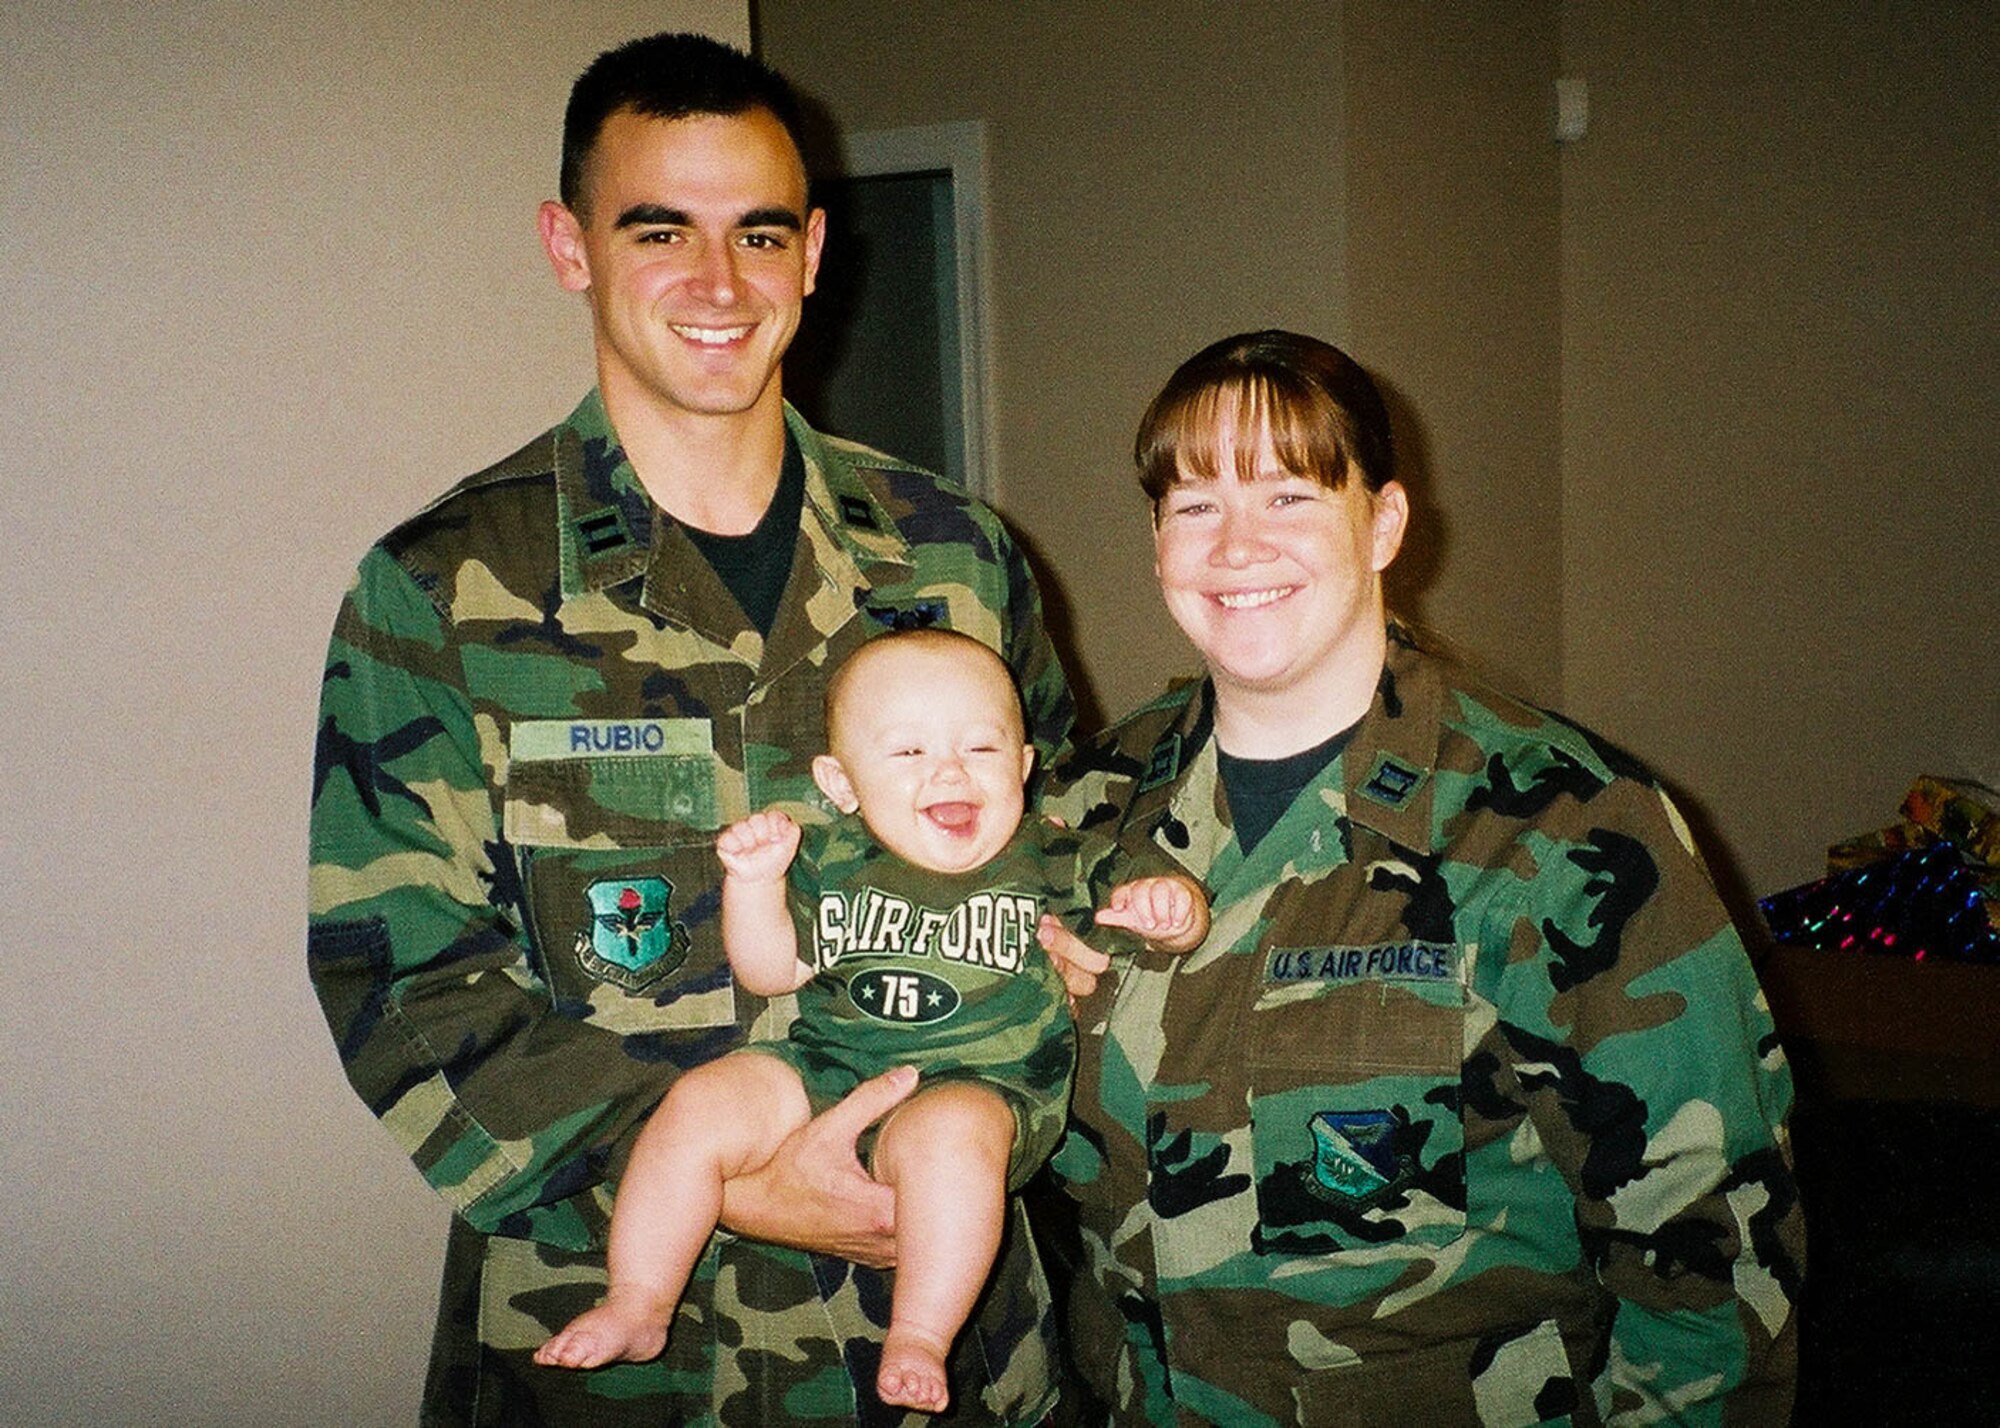 Col. Stuart Rubio, 403rd Wing commander, and his wife Megan, graduated from the U.S. Air Force Academy in 1998 and 1997. In June 2021, their son Ashton, now 18, departs to start his first year at the Academy and is scheduled to graduate in the class of 2025. (U.S. Air Force courtesy photo)